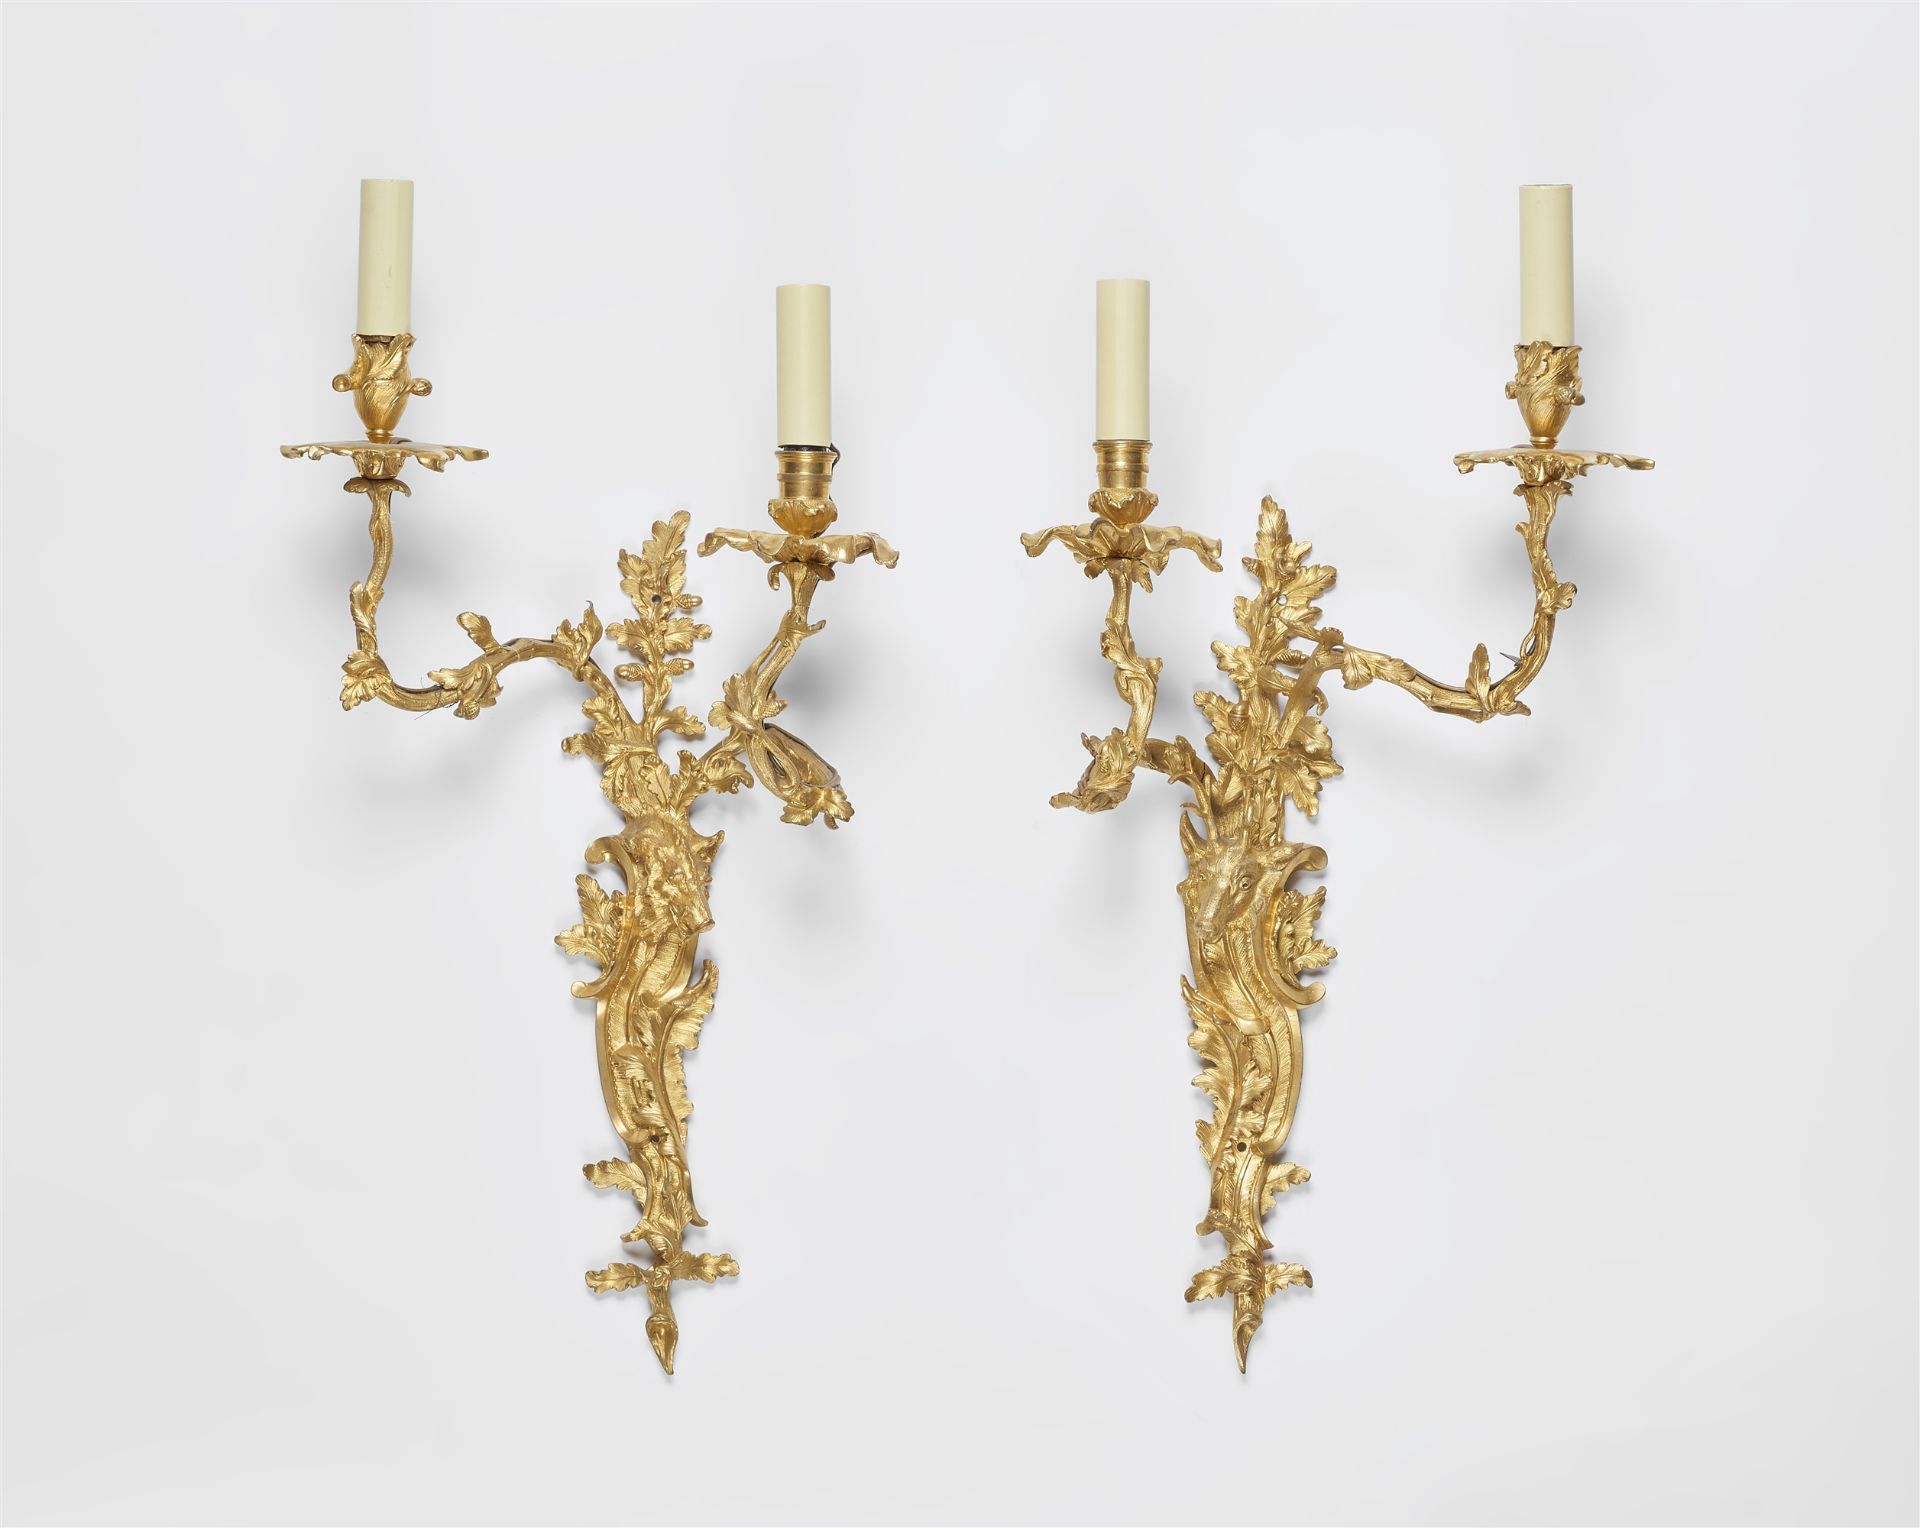 A pair of ormolu appliques with hunting trophies